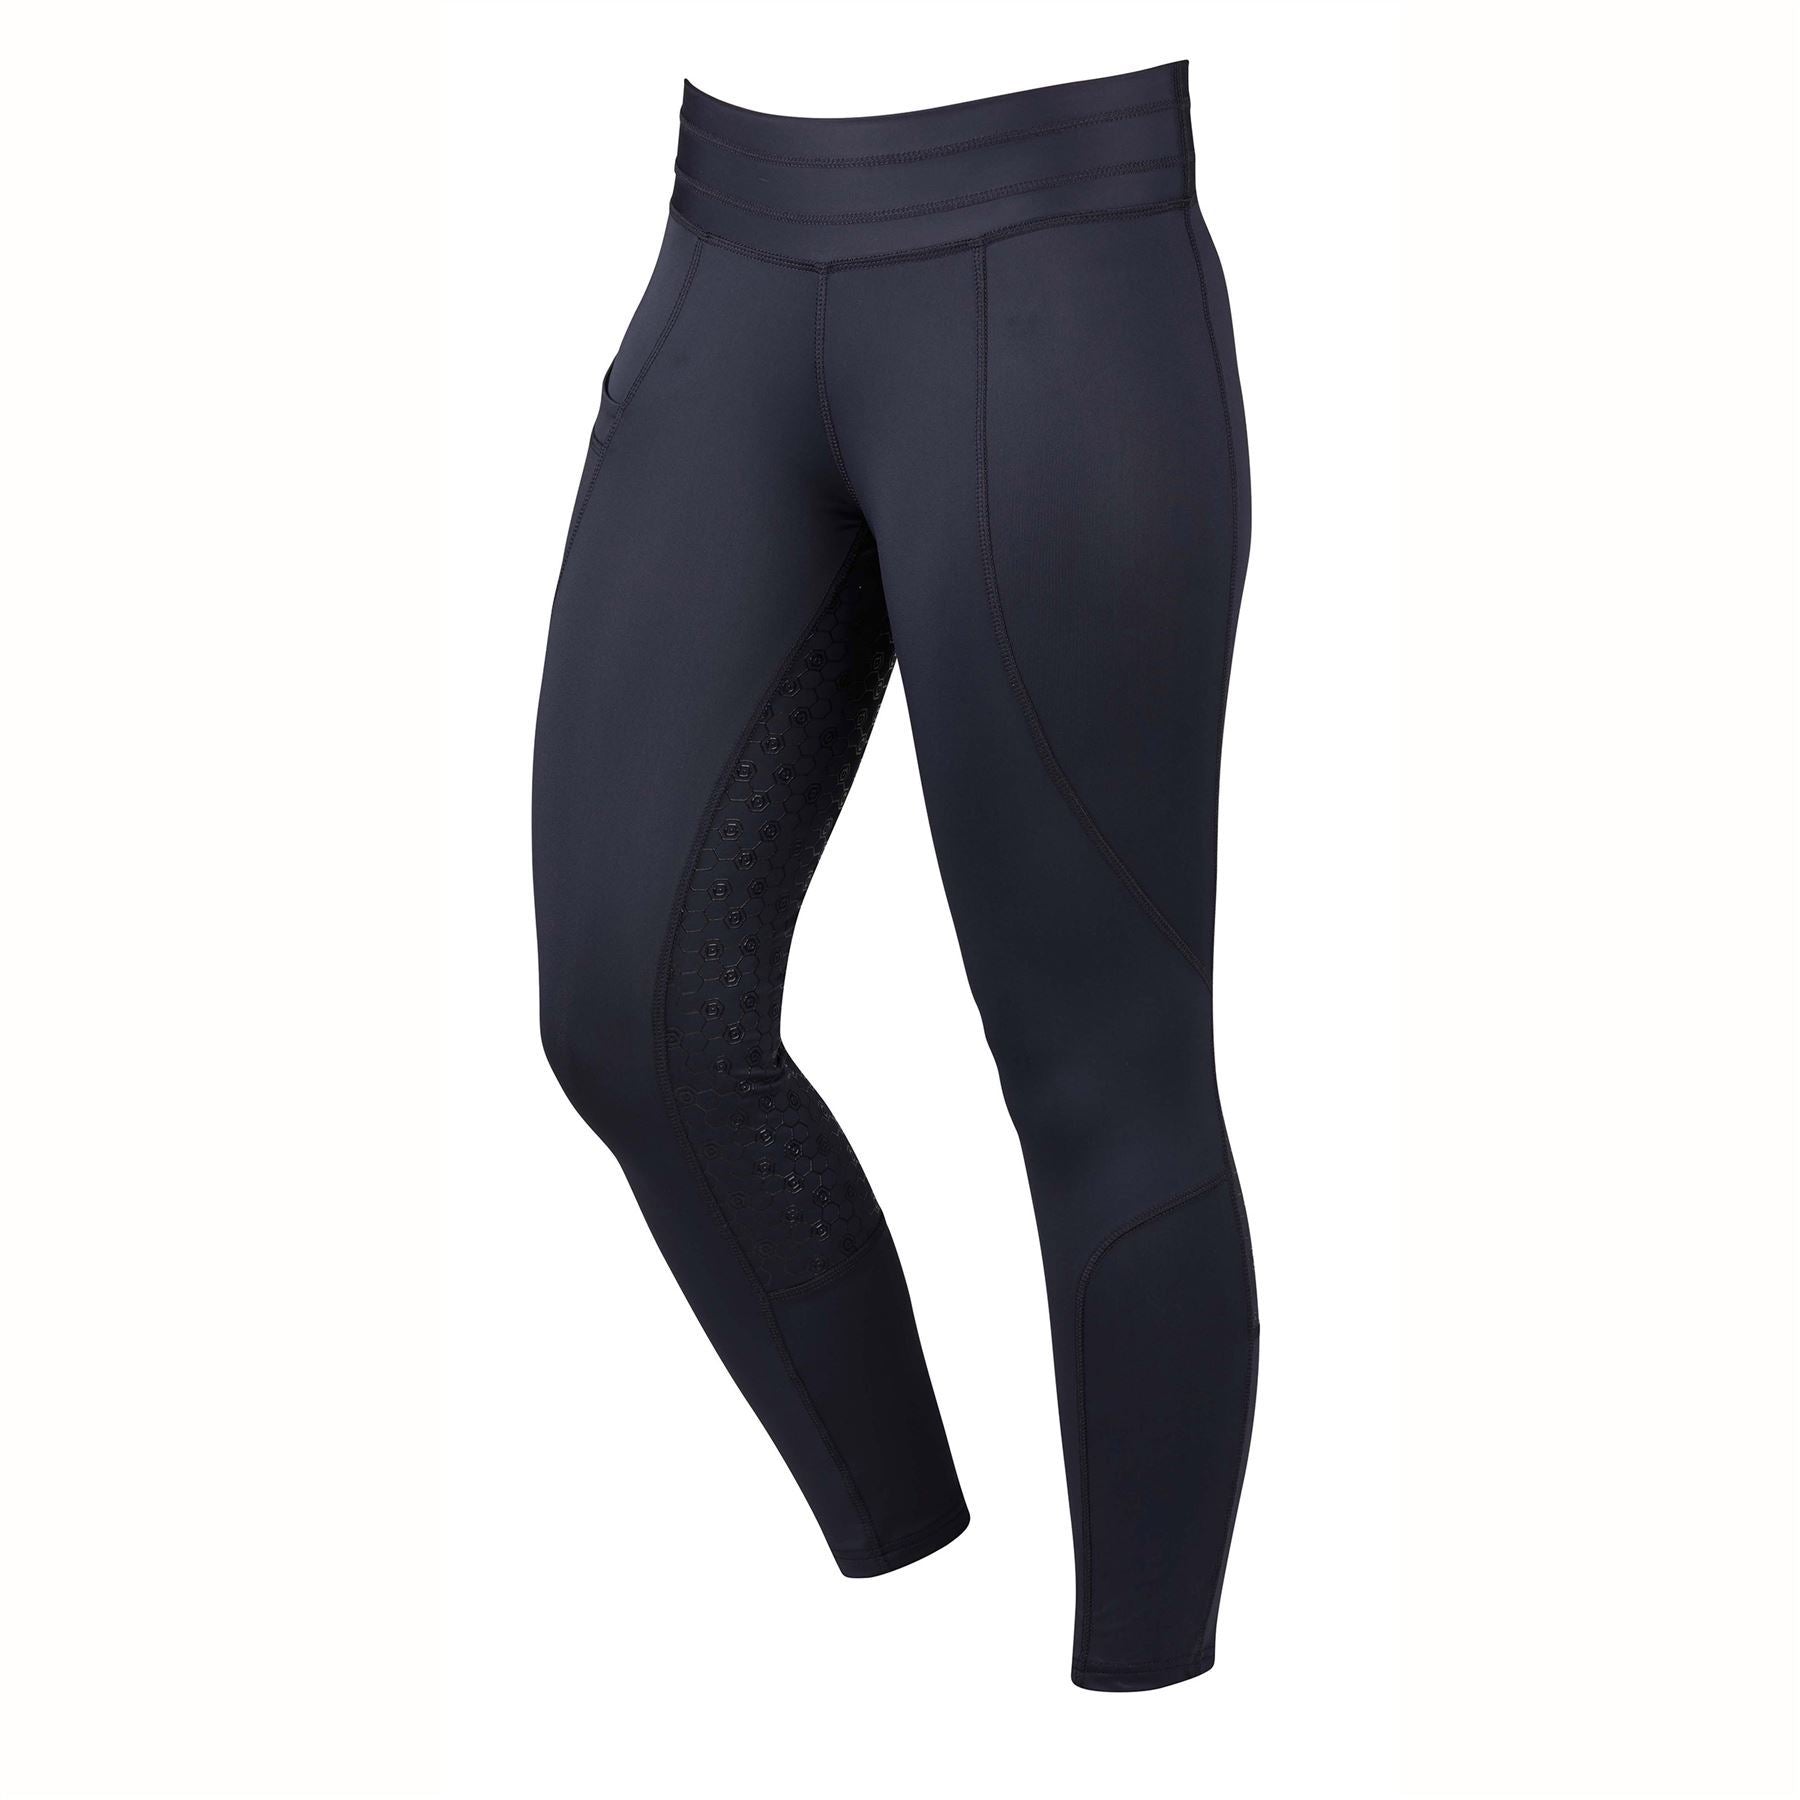 Dublin Performance Compression Tight - Just Horse Riders